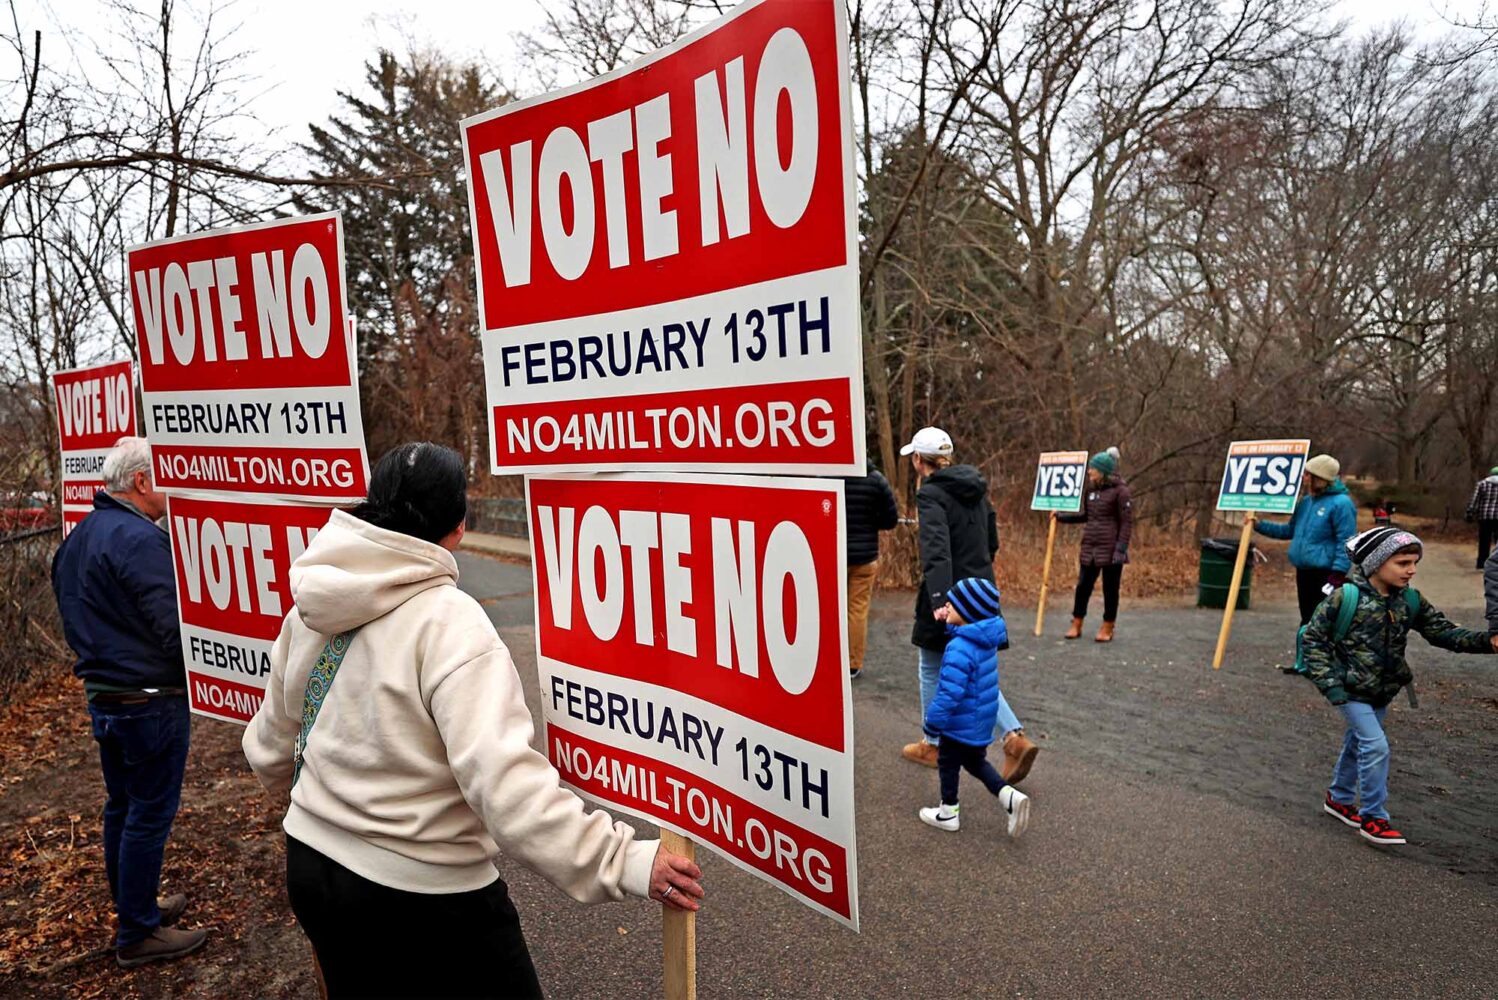 Photo: Demonstrators with signs reading "Vote No February 13th" advocating against a new MBTA transit law implemented by the state of Massachusetts. Vote Yes signs can be seen in the distance.